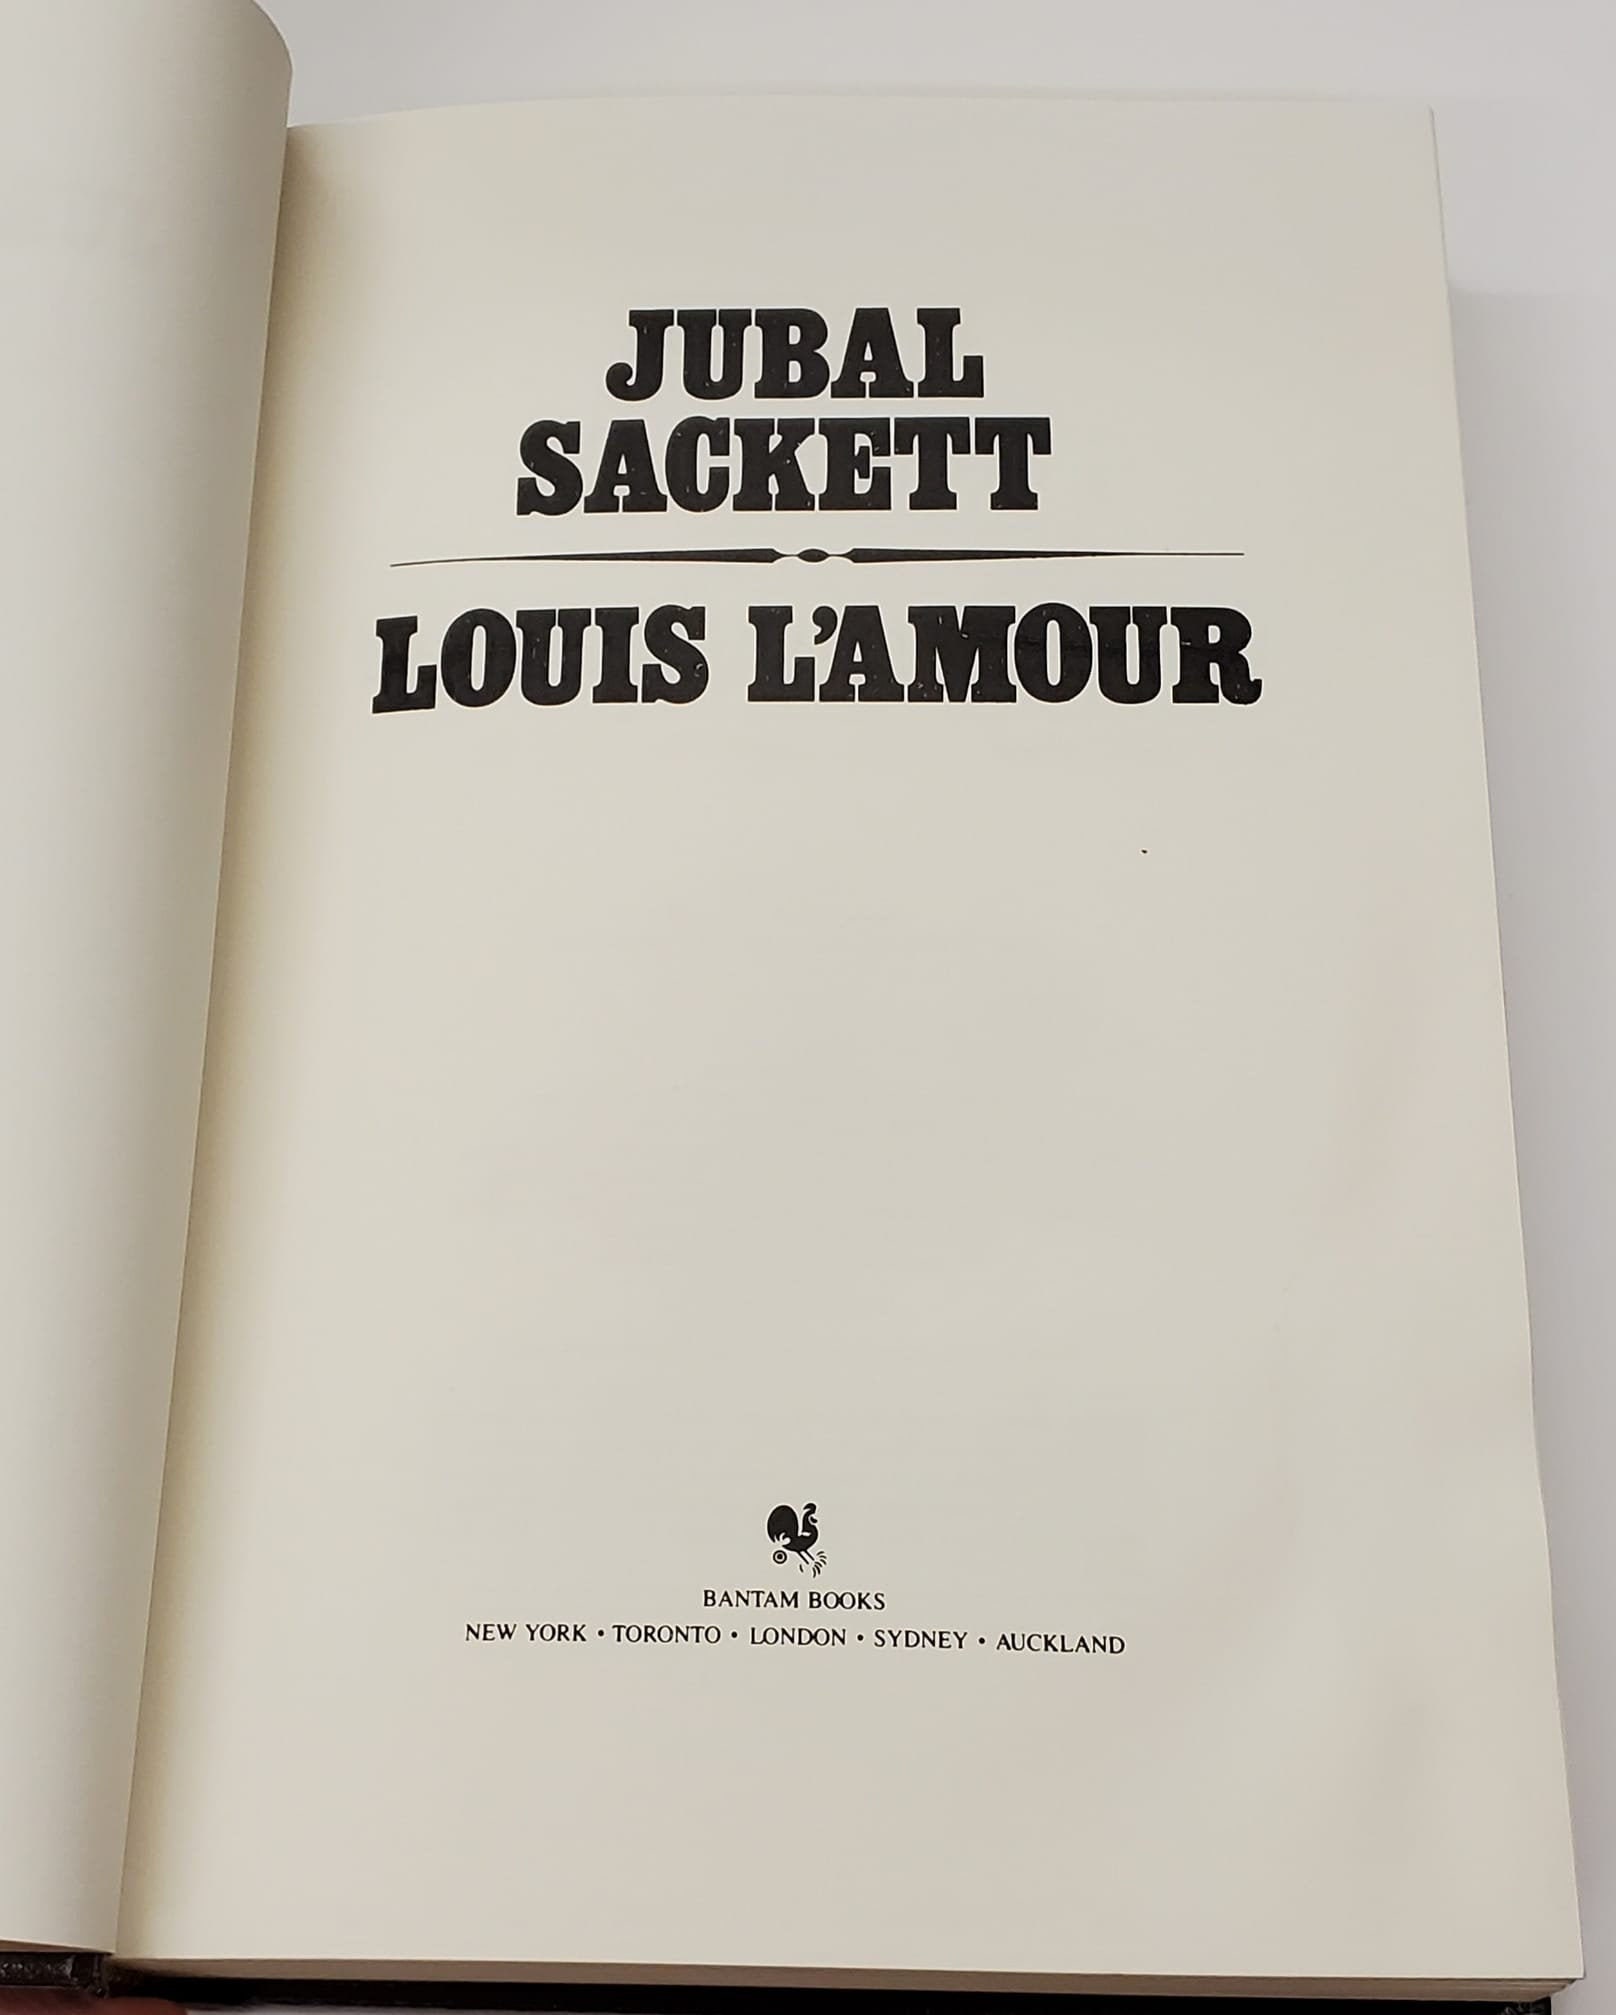 Jubal Sackett, The Louis L'Amour Collection